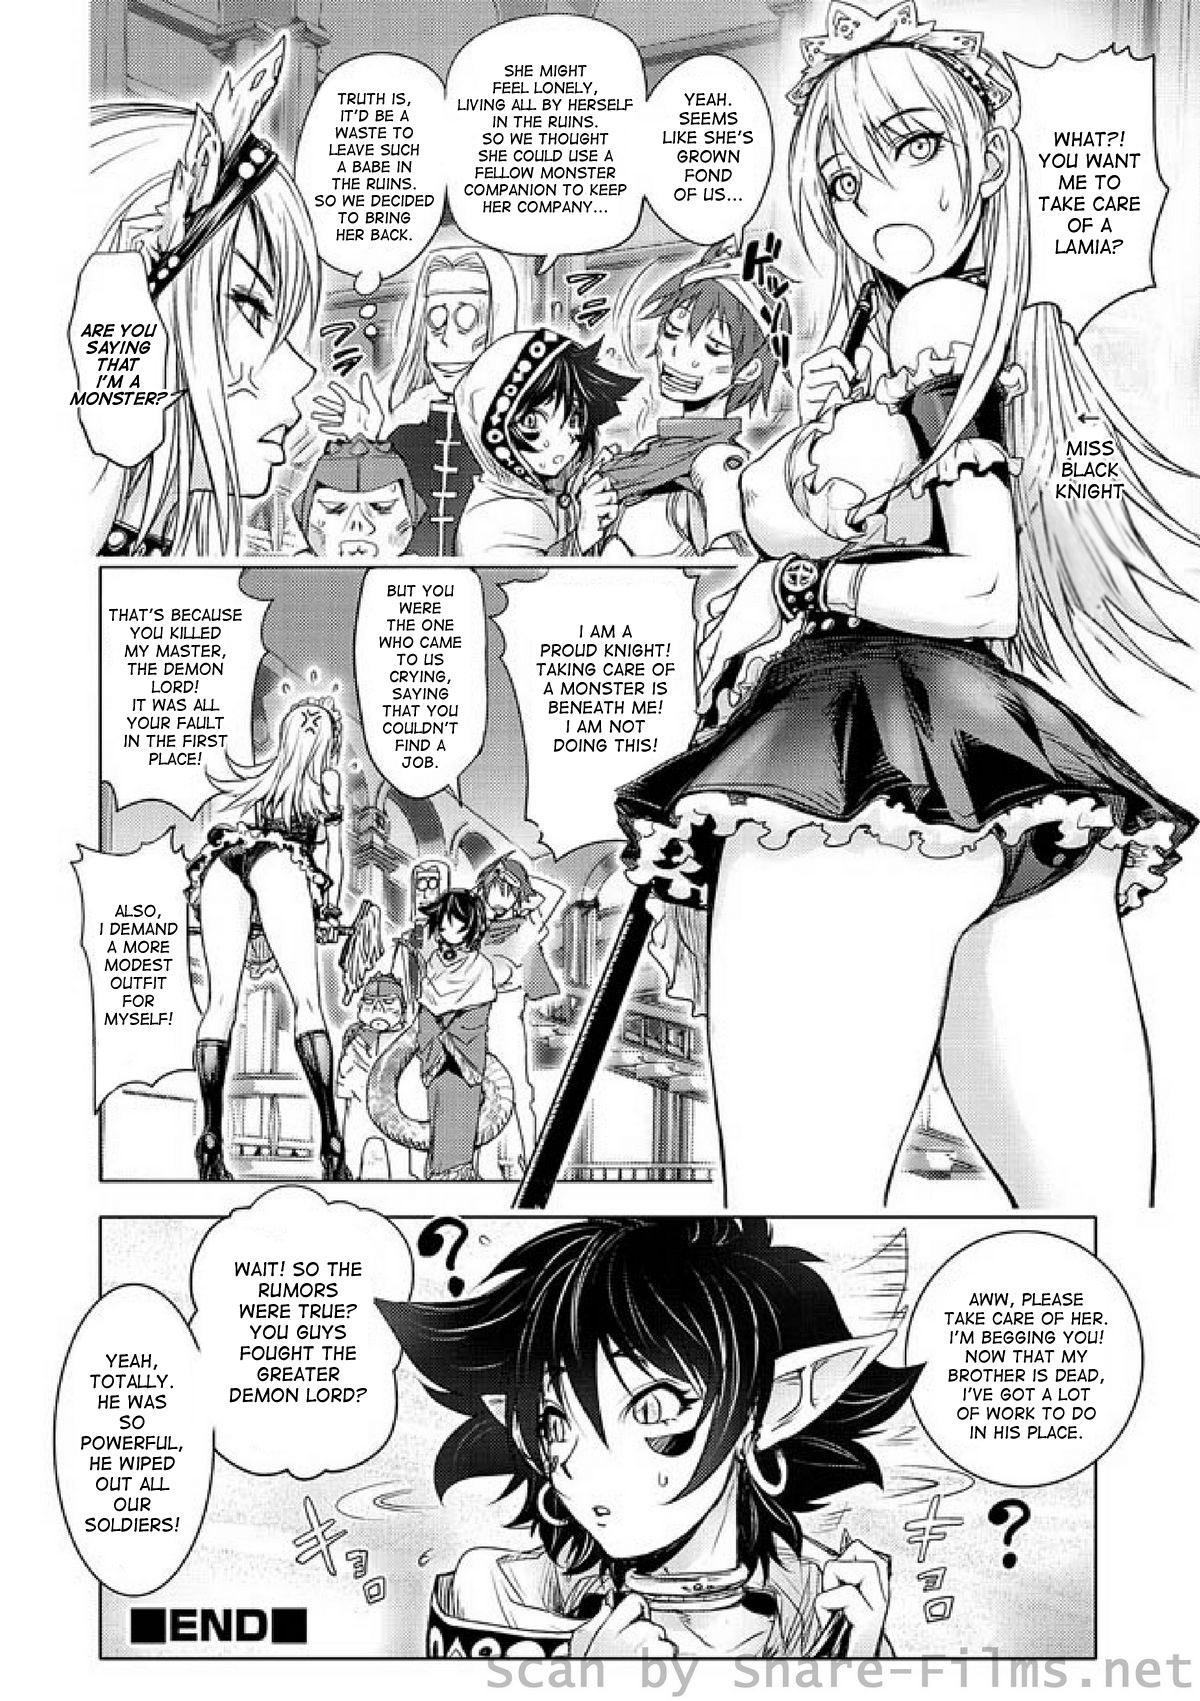 The Three Heroes' Adventures Ch. 2 - Snake Girl 18